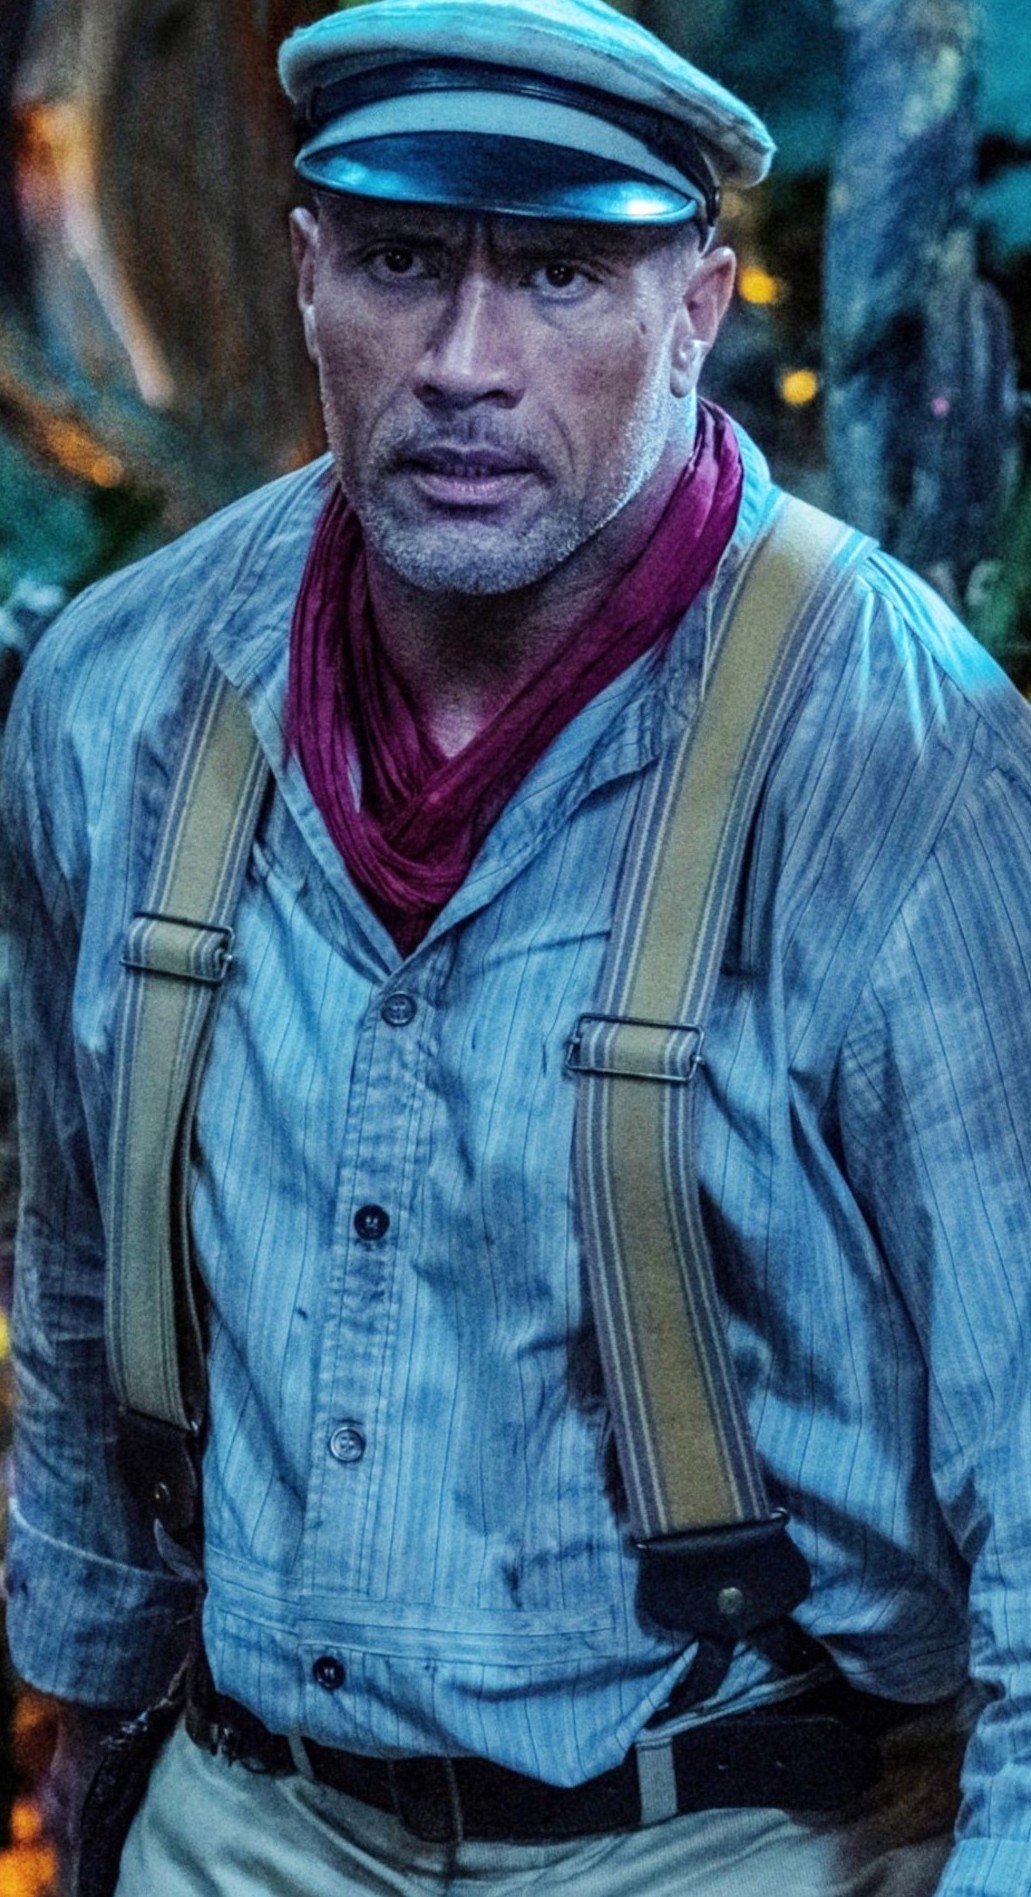 Dwayne &quot;The Rock&quot; Johnson wearing a cap, suspenders, and a button-up shirt